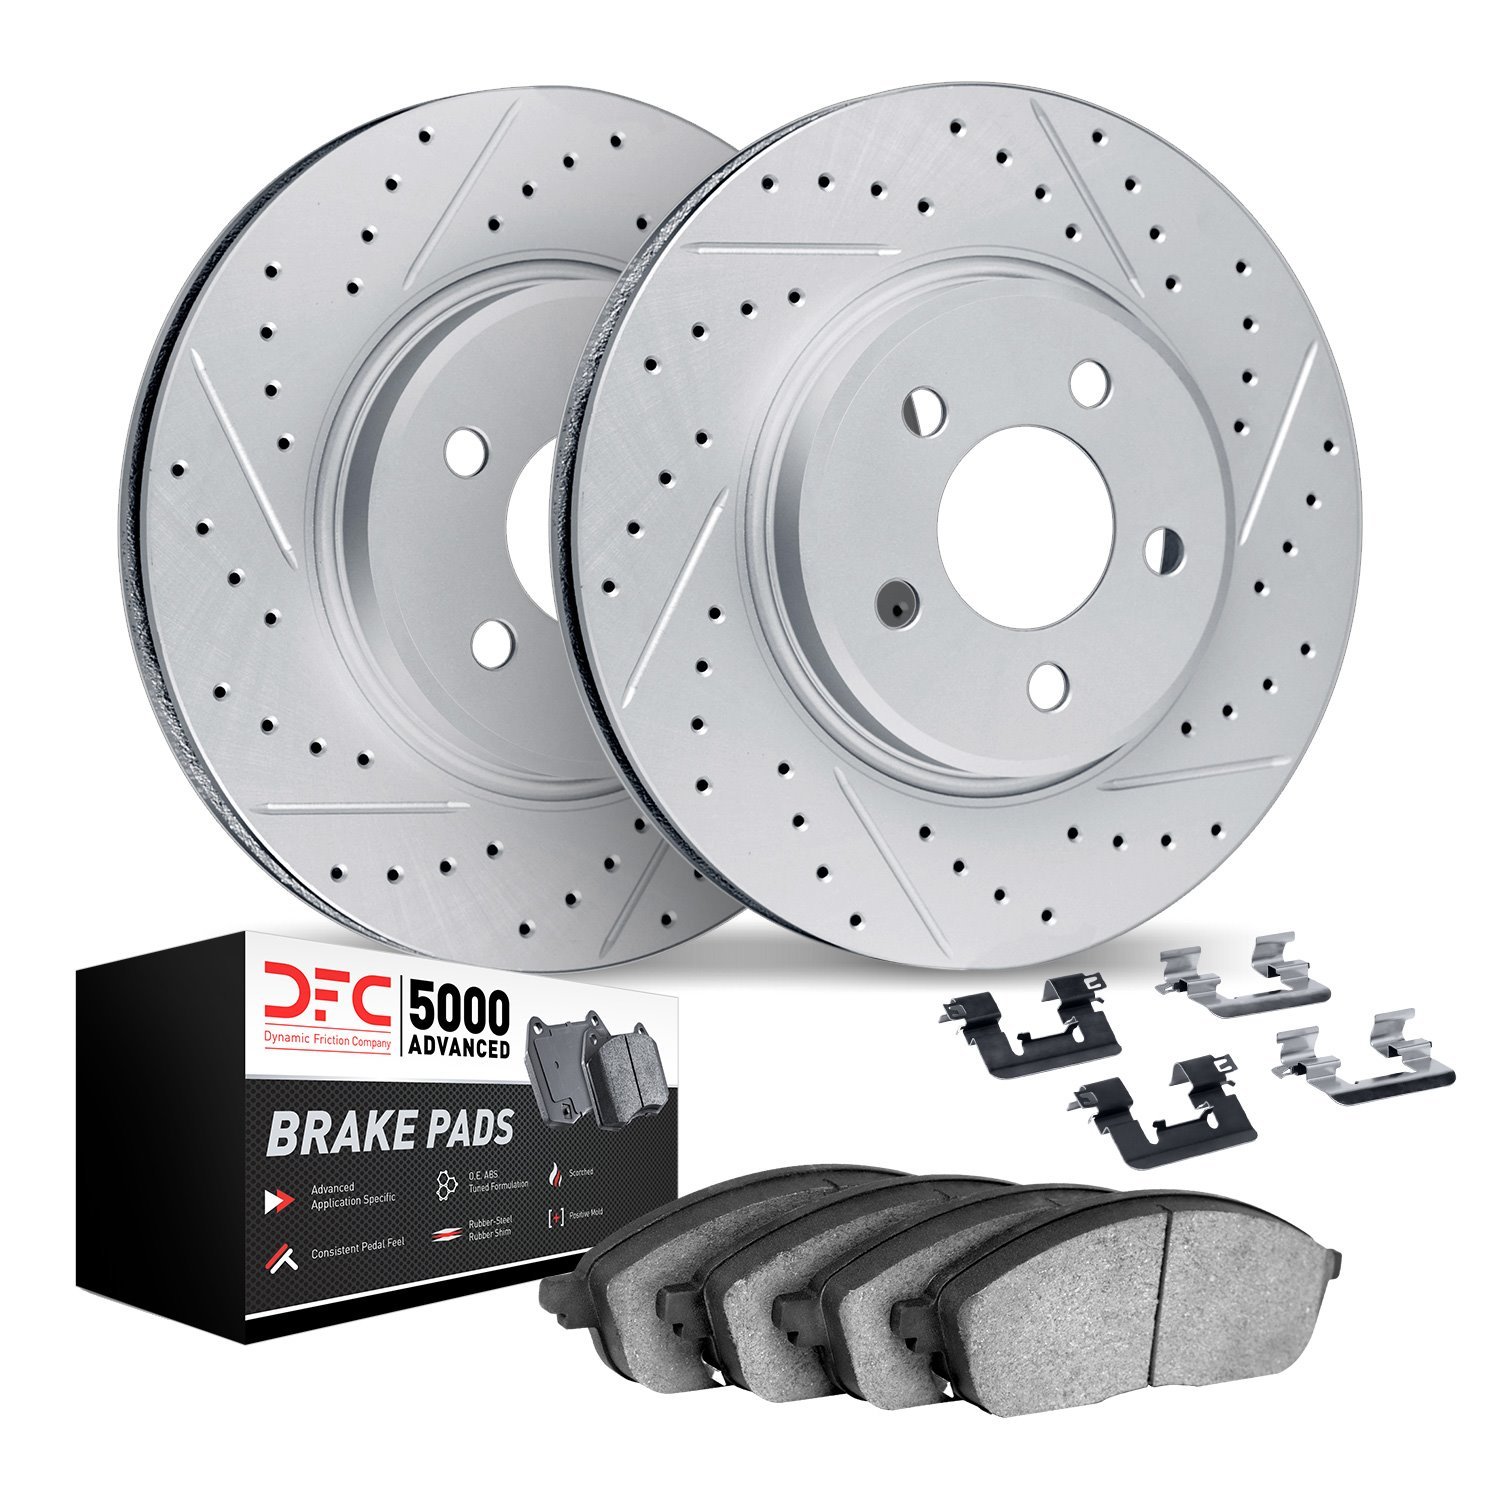 2512-80038 Geoperformance Drilled/Slotted Rotors w/5000 Advanced Brake Pads Kit & Hardware, Fits Select Ford/Lincoln/Mercury/Maz